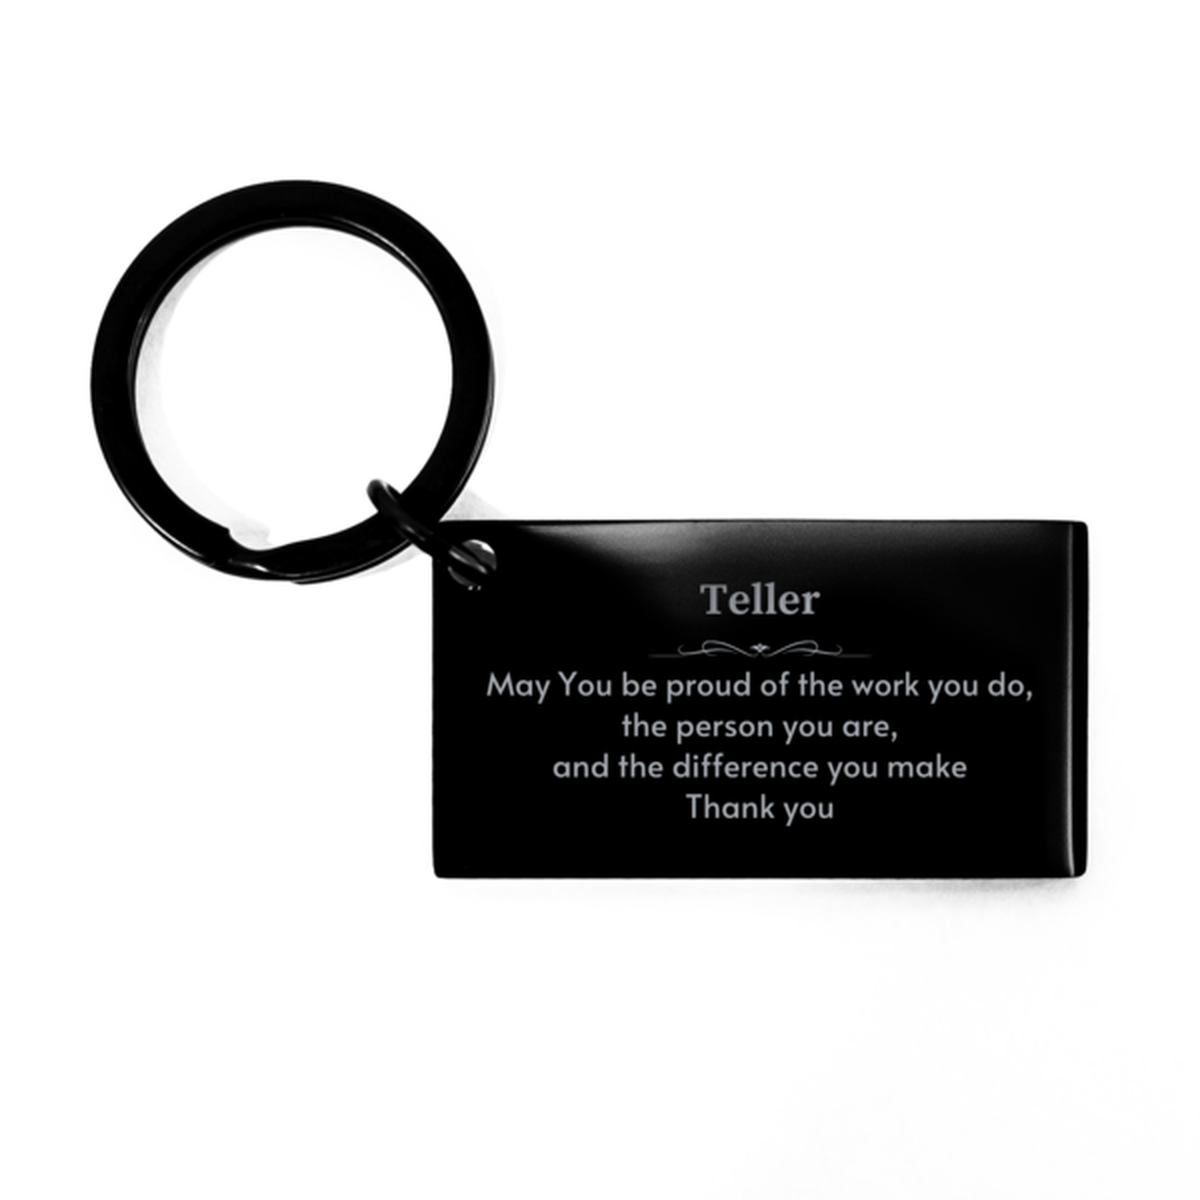 Heartwarming Keychain Retirement Coworkers Gifts for Teller, Yoga Instructor May You be proud of the work you do, the person you are Gifts for Boss Men Women Friends